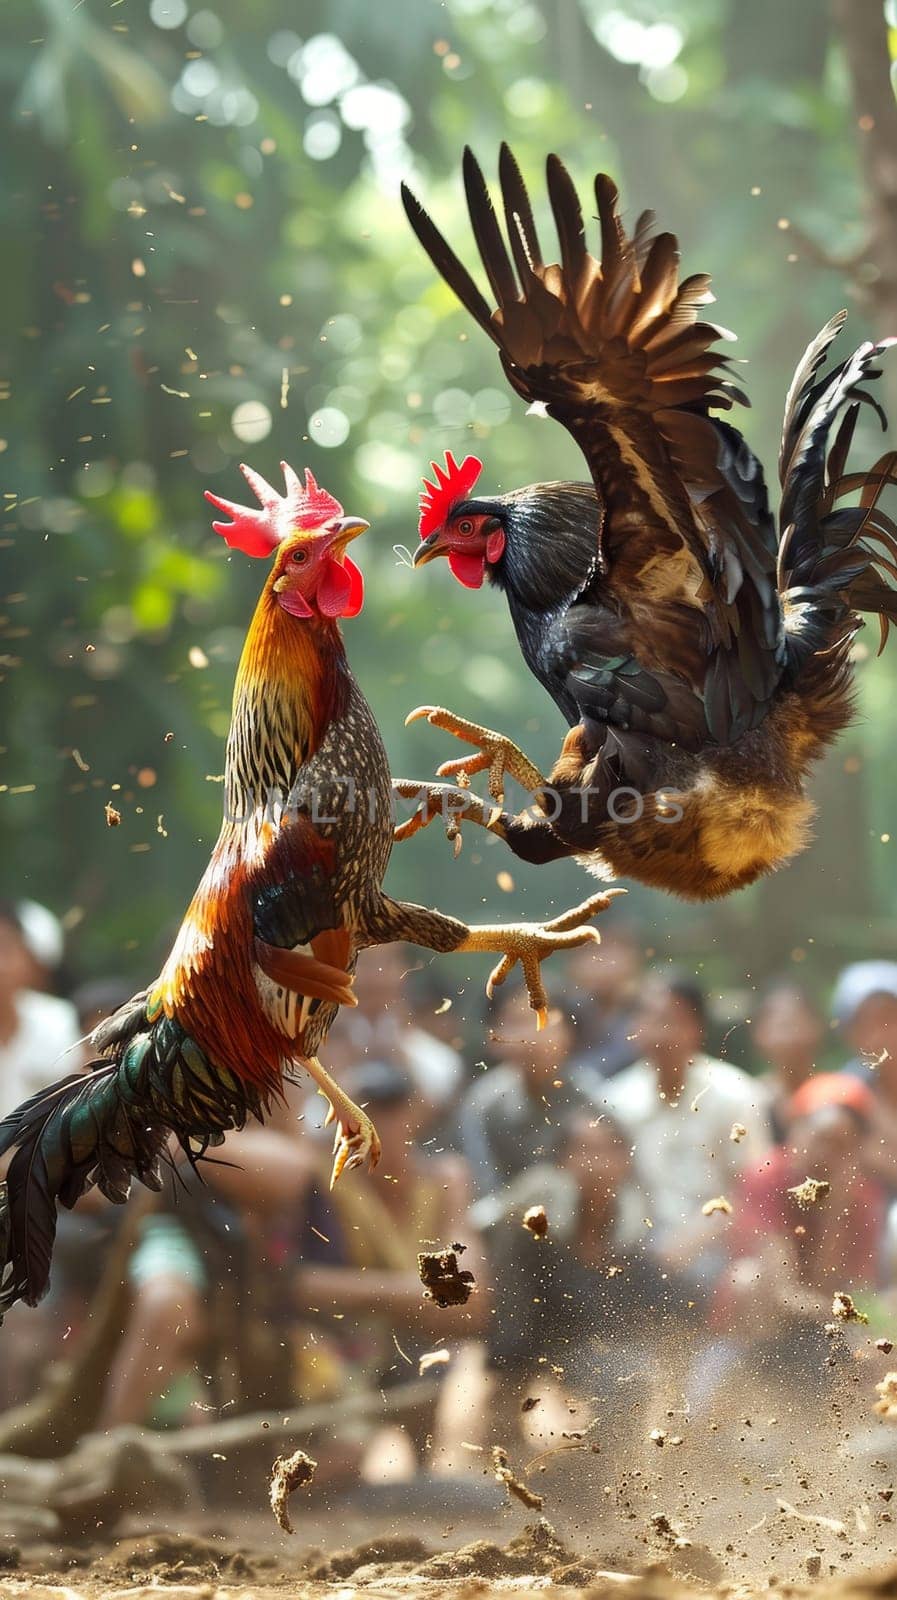 A dynamic cockfight with roosters engaged in battle while surrounded by an attentive crowd in a tropical village setting